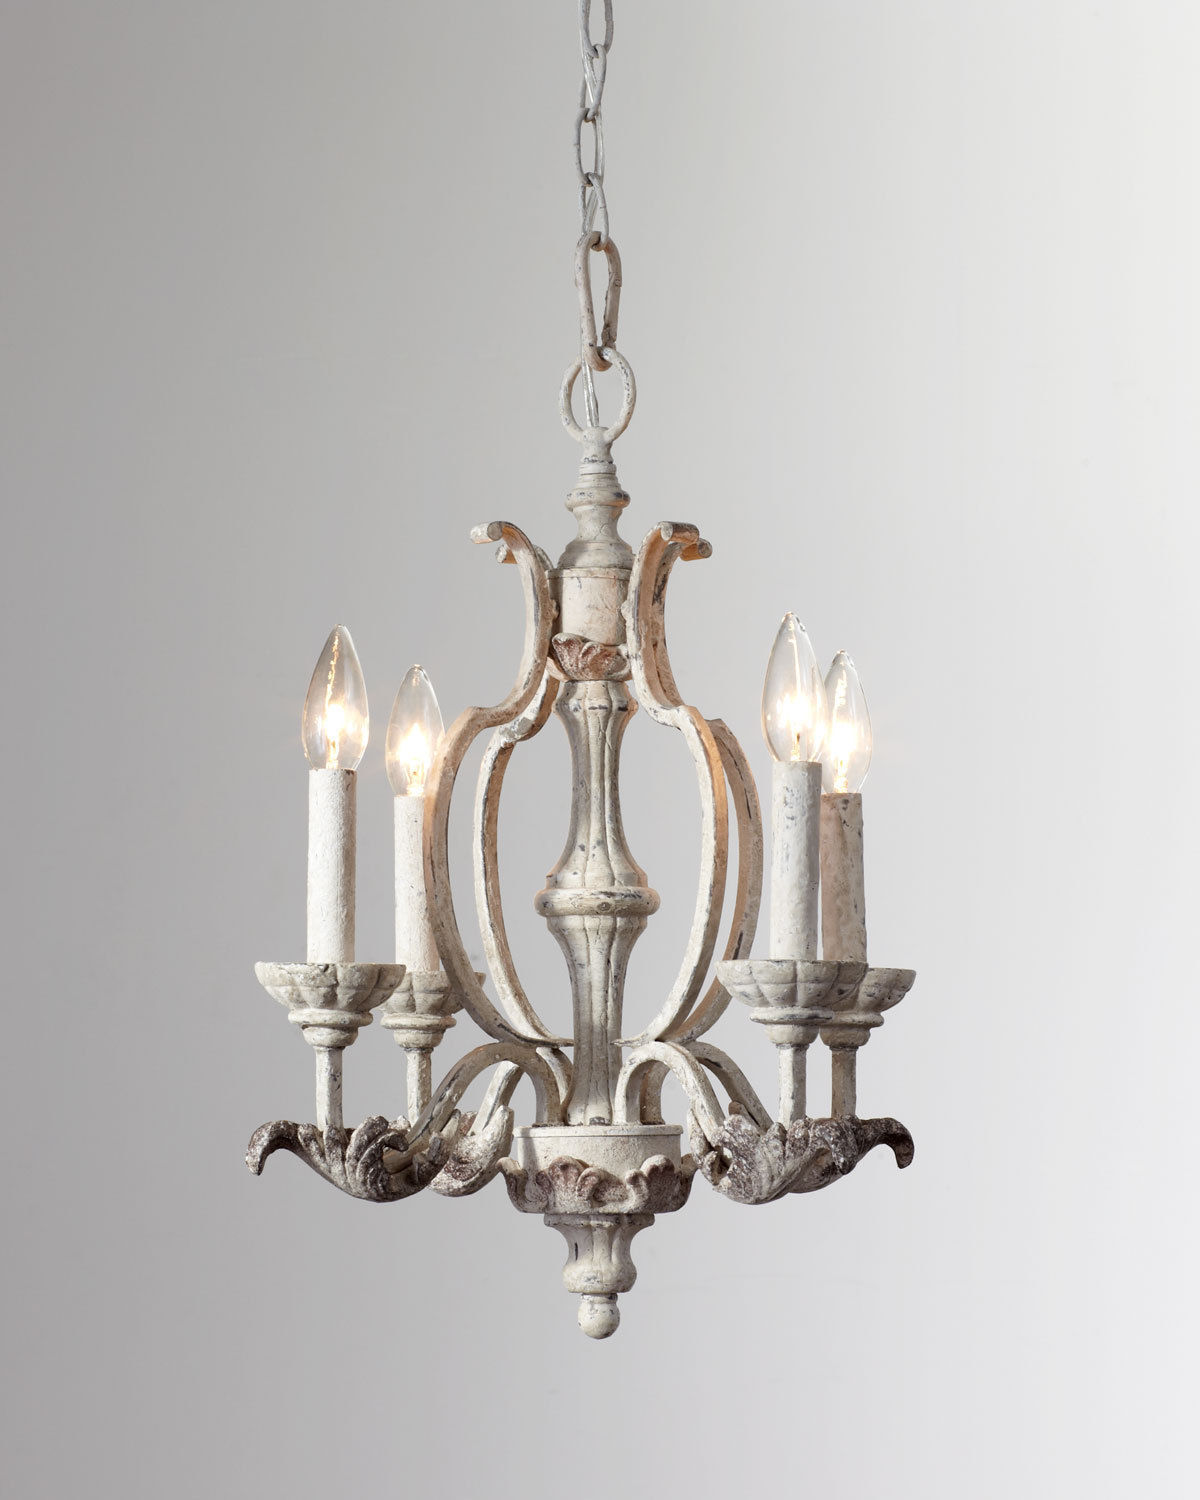 19" Horchow French Restoration Antique White Candle Chandelier $379 New - $315.52